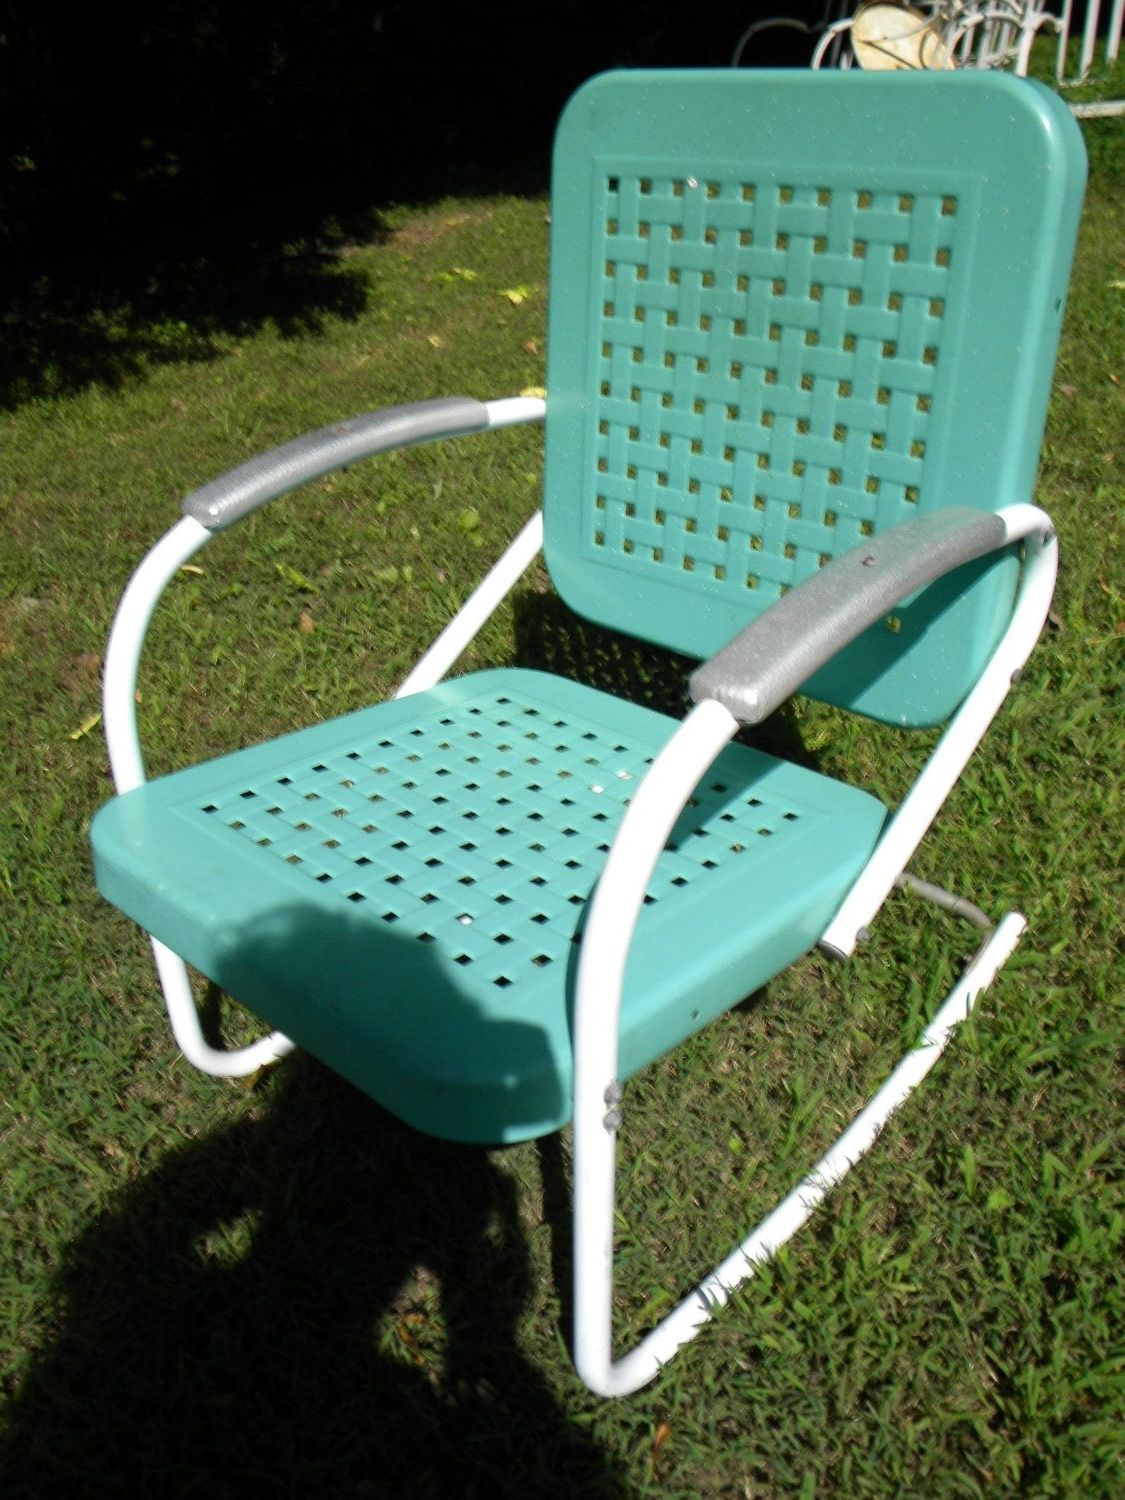 Current Reserve For Sandy Vtg 50s 60s Retro Outdoor Metal Lawn Patio Porch Intended For Retro Outdoor Rocking Chairs (View 4 of 15)